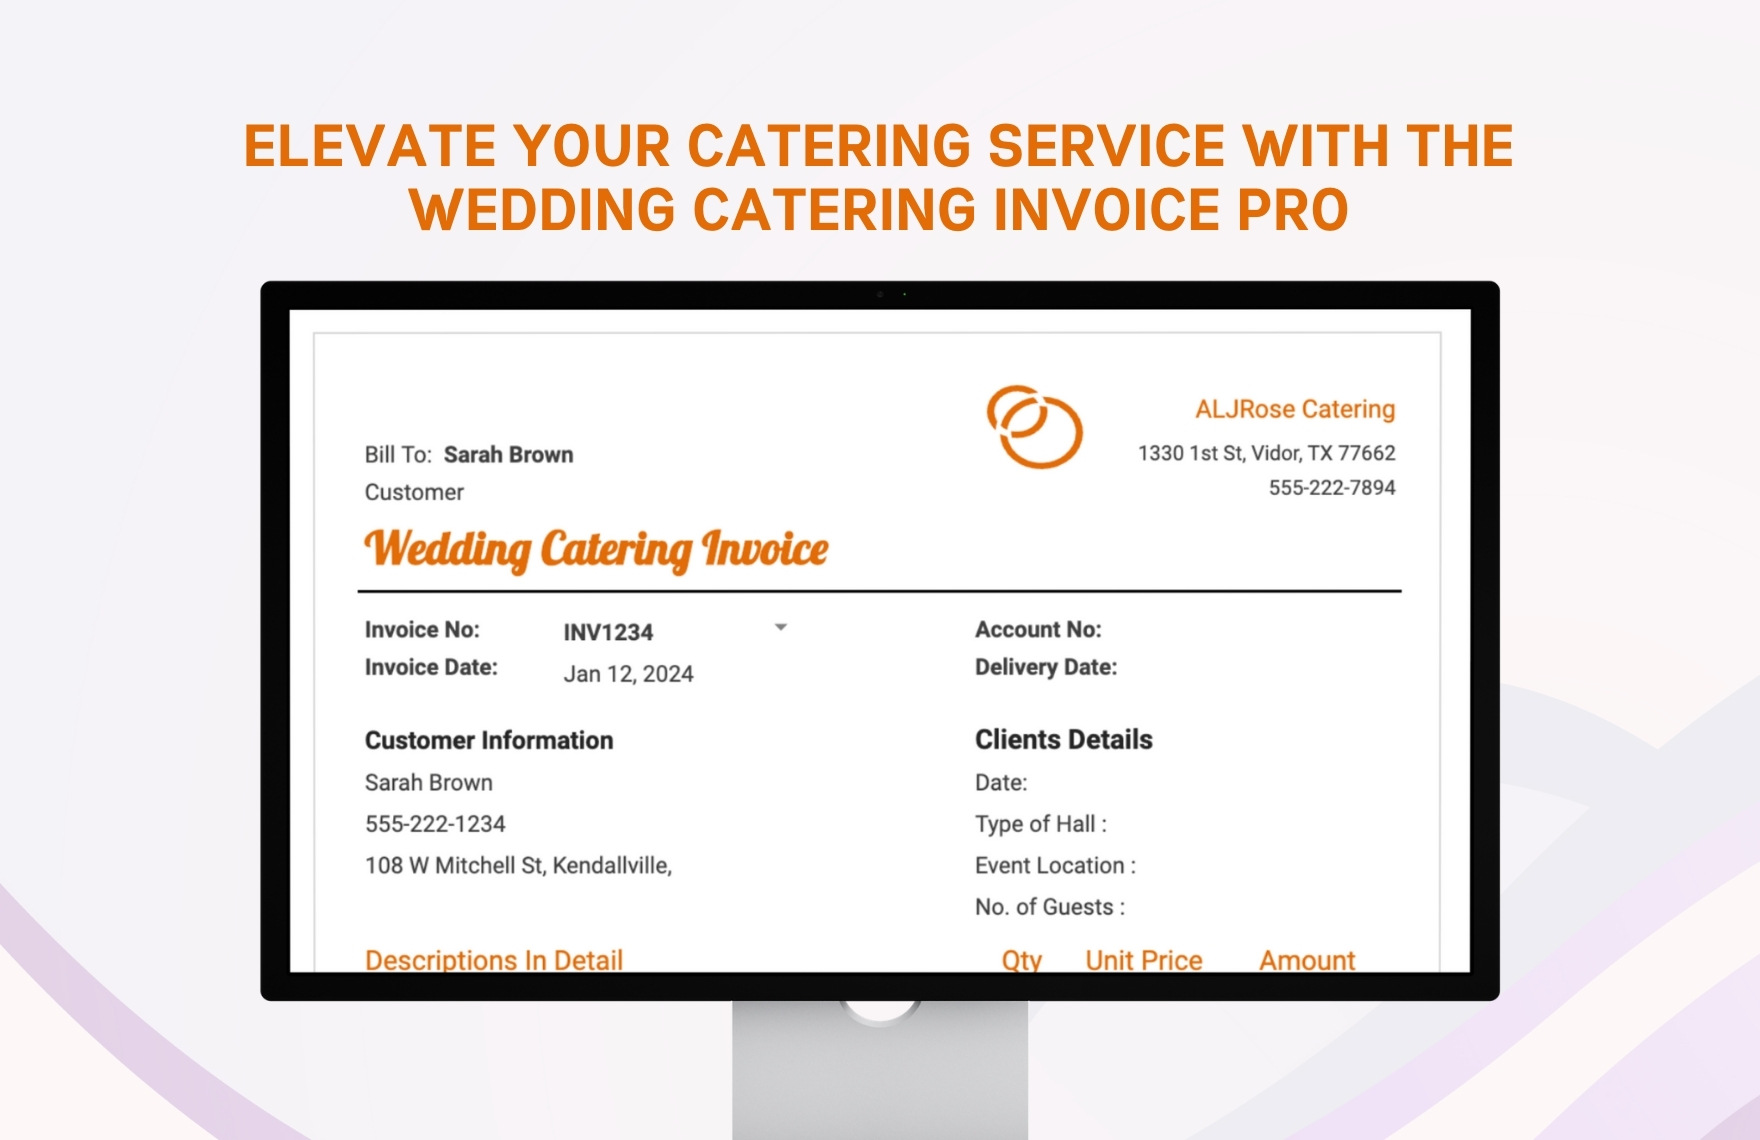 Wedding Catering Invoice Template